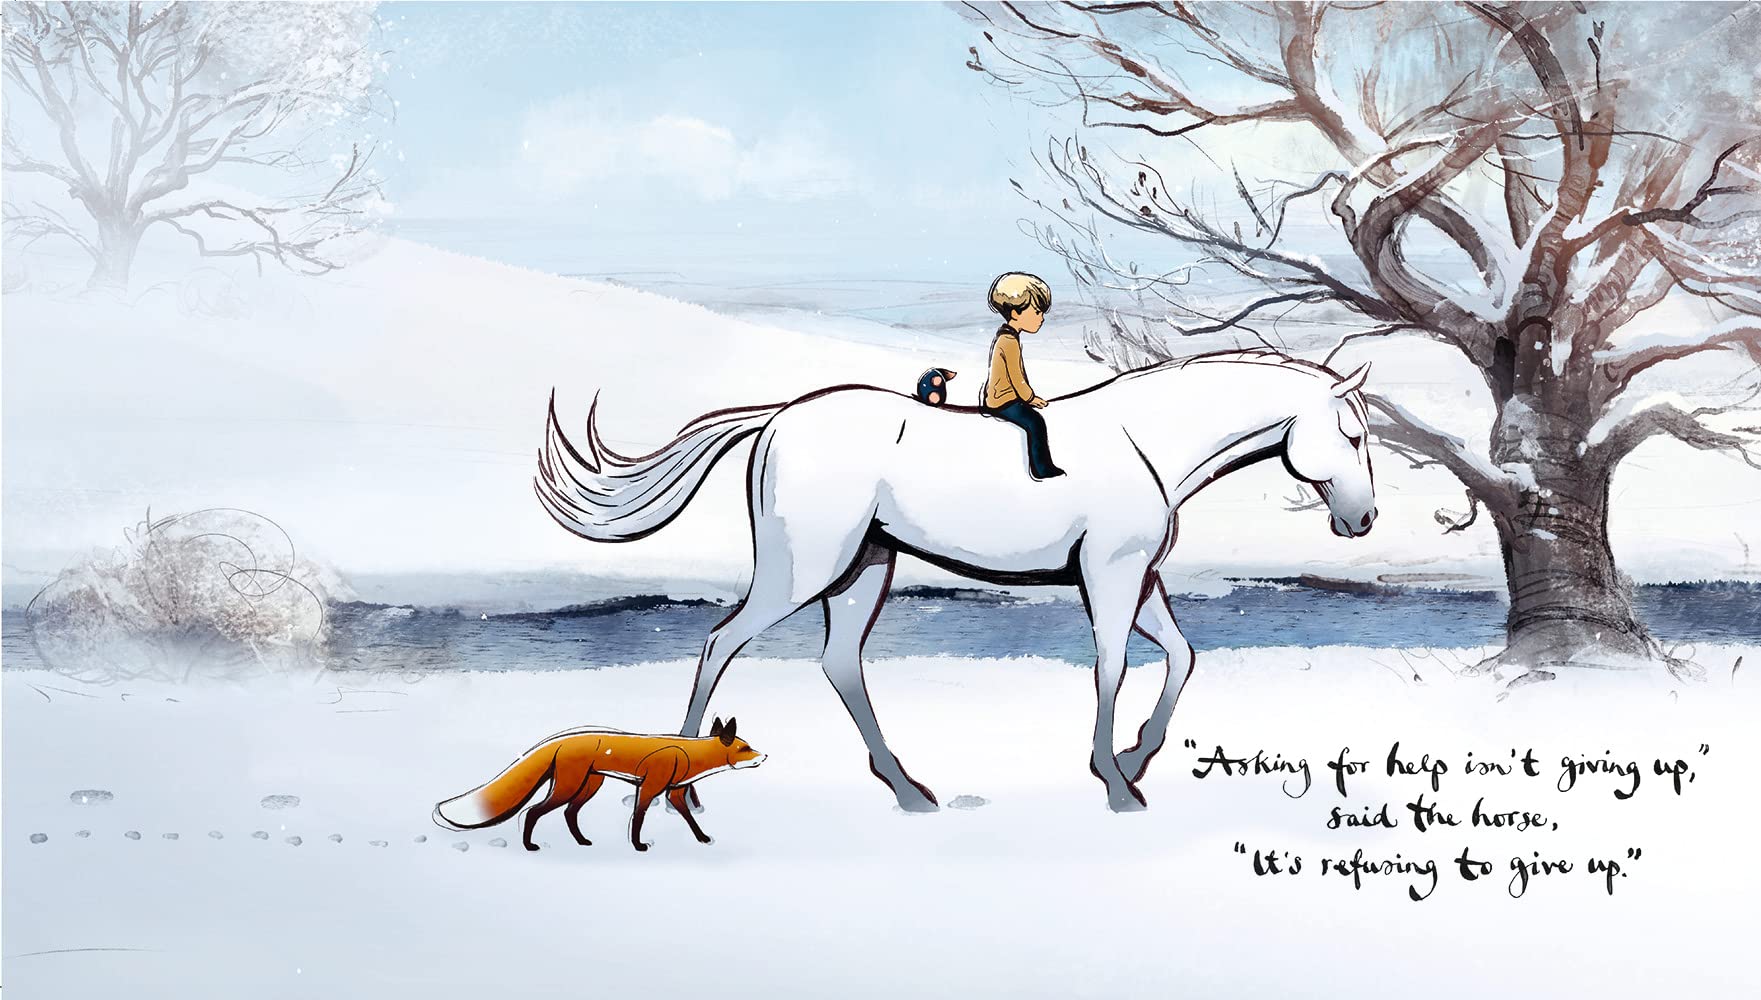 From the book companion to the animated version of The Boy, the Mole, the Fox and the Horse